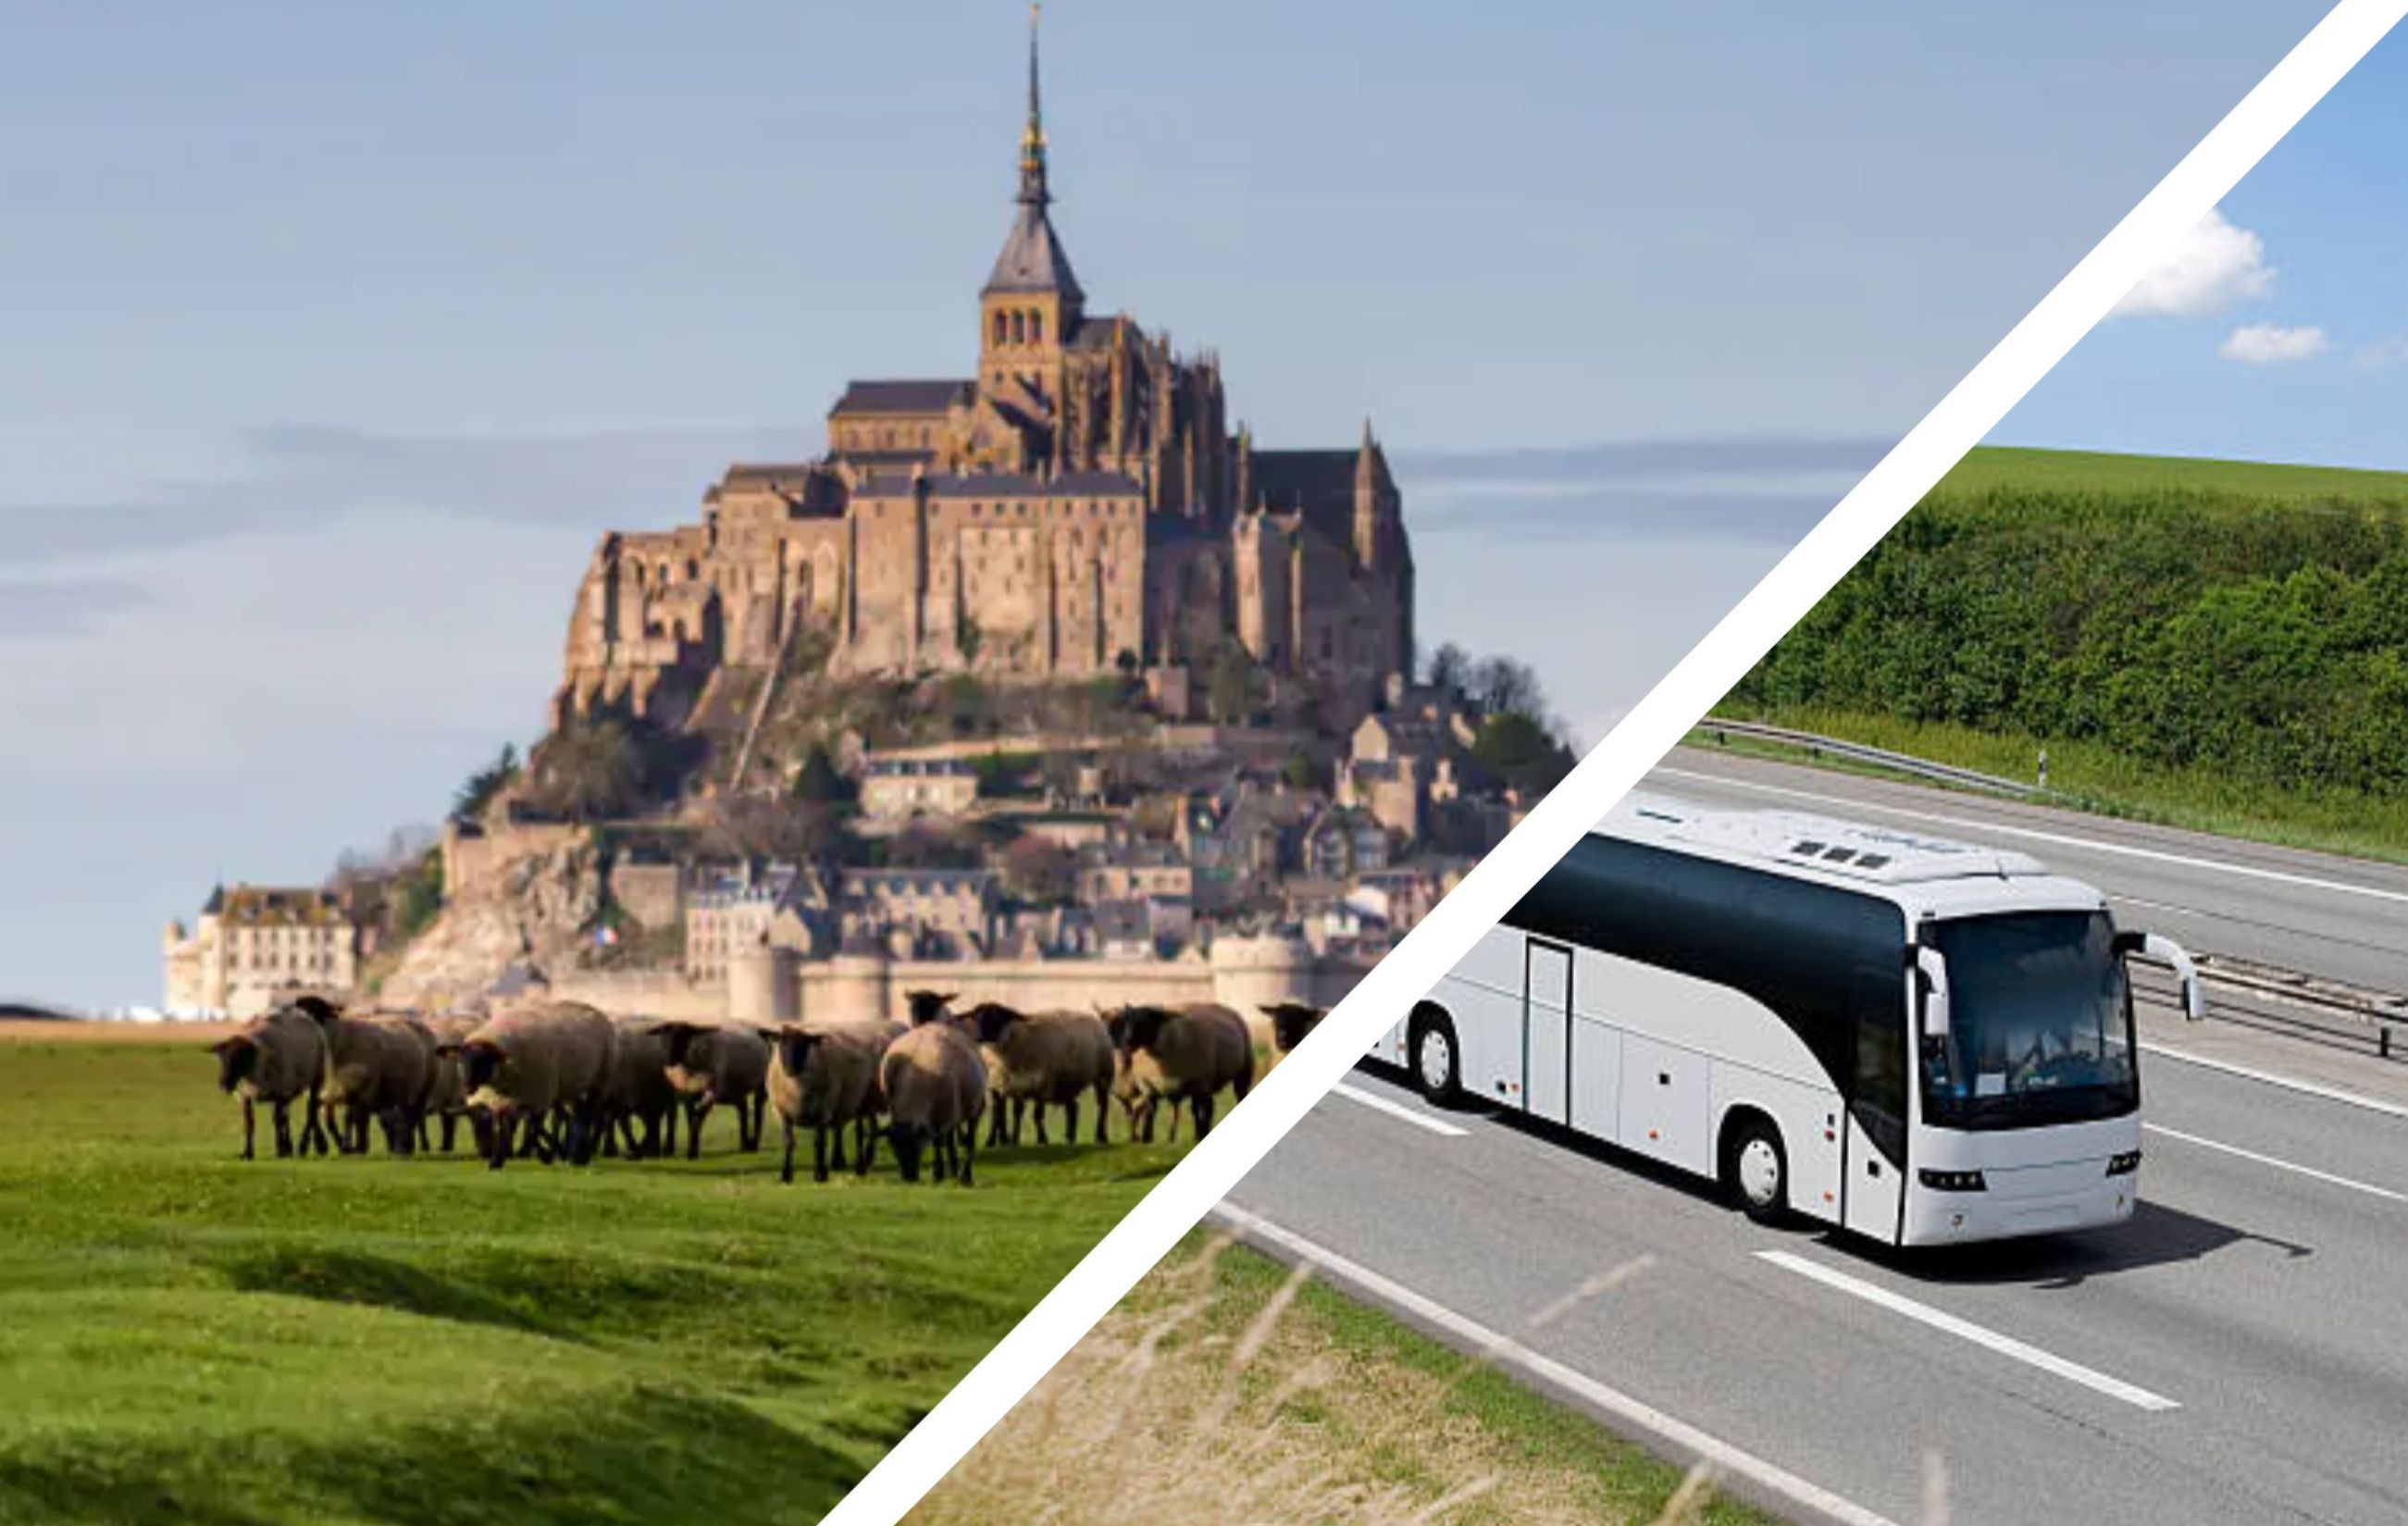 Audio Guided Tour to Mont Saint-Michel from Paris with transportation